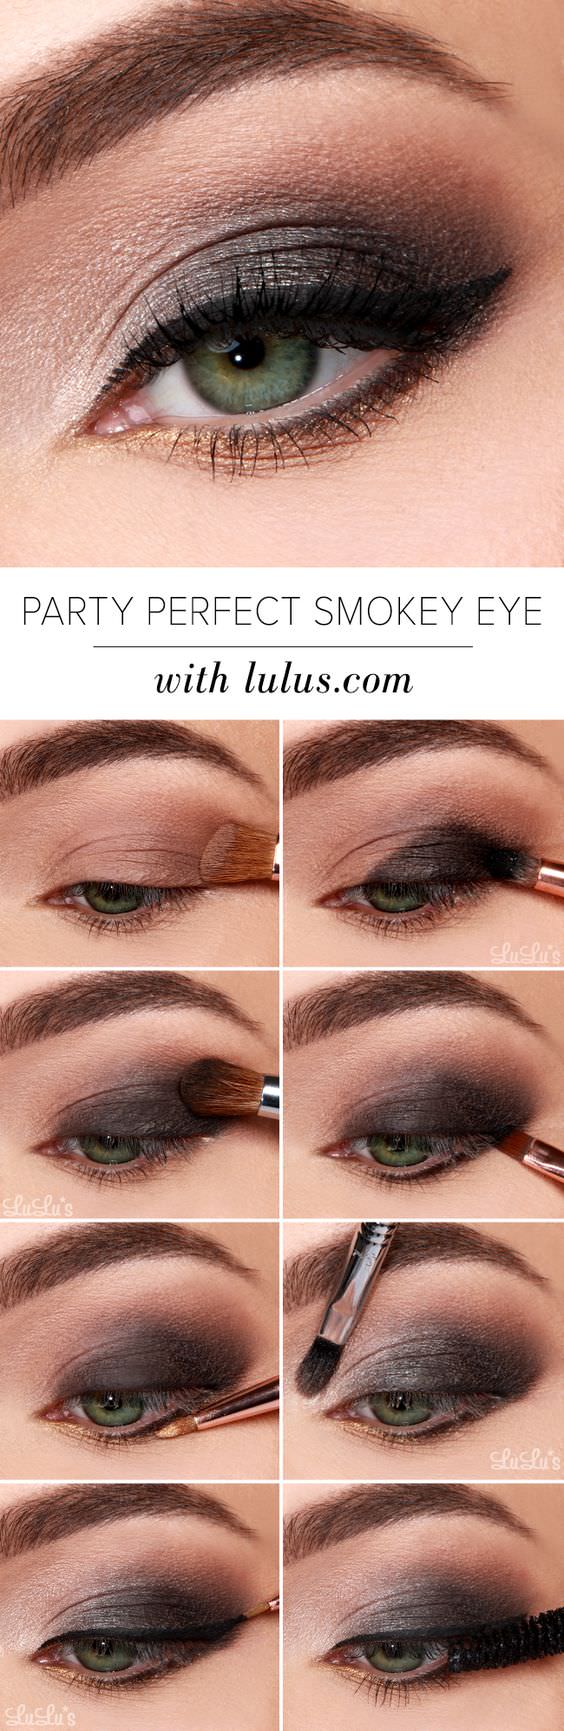 Here are 15 step by step tutorials to help you get those perfect smoky eyes.